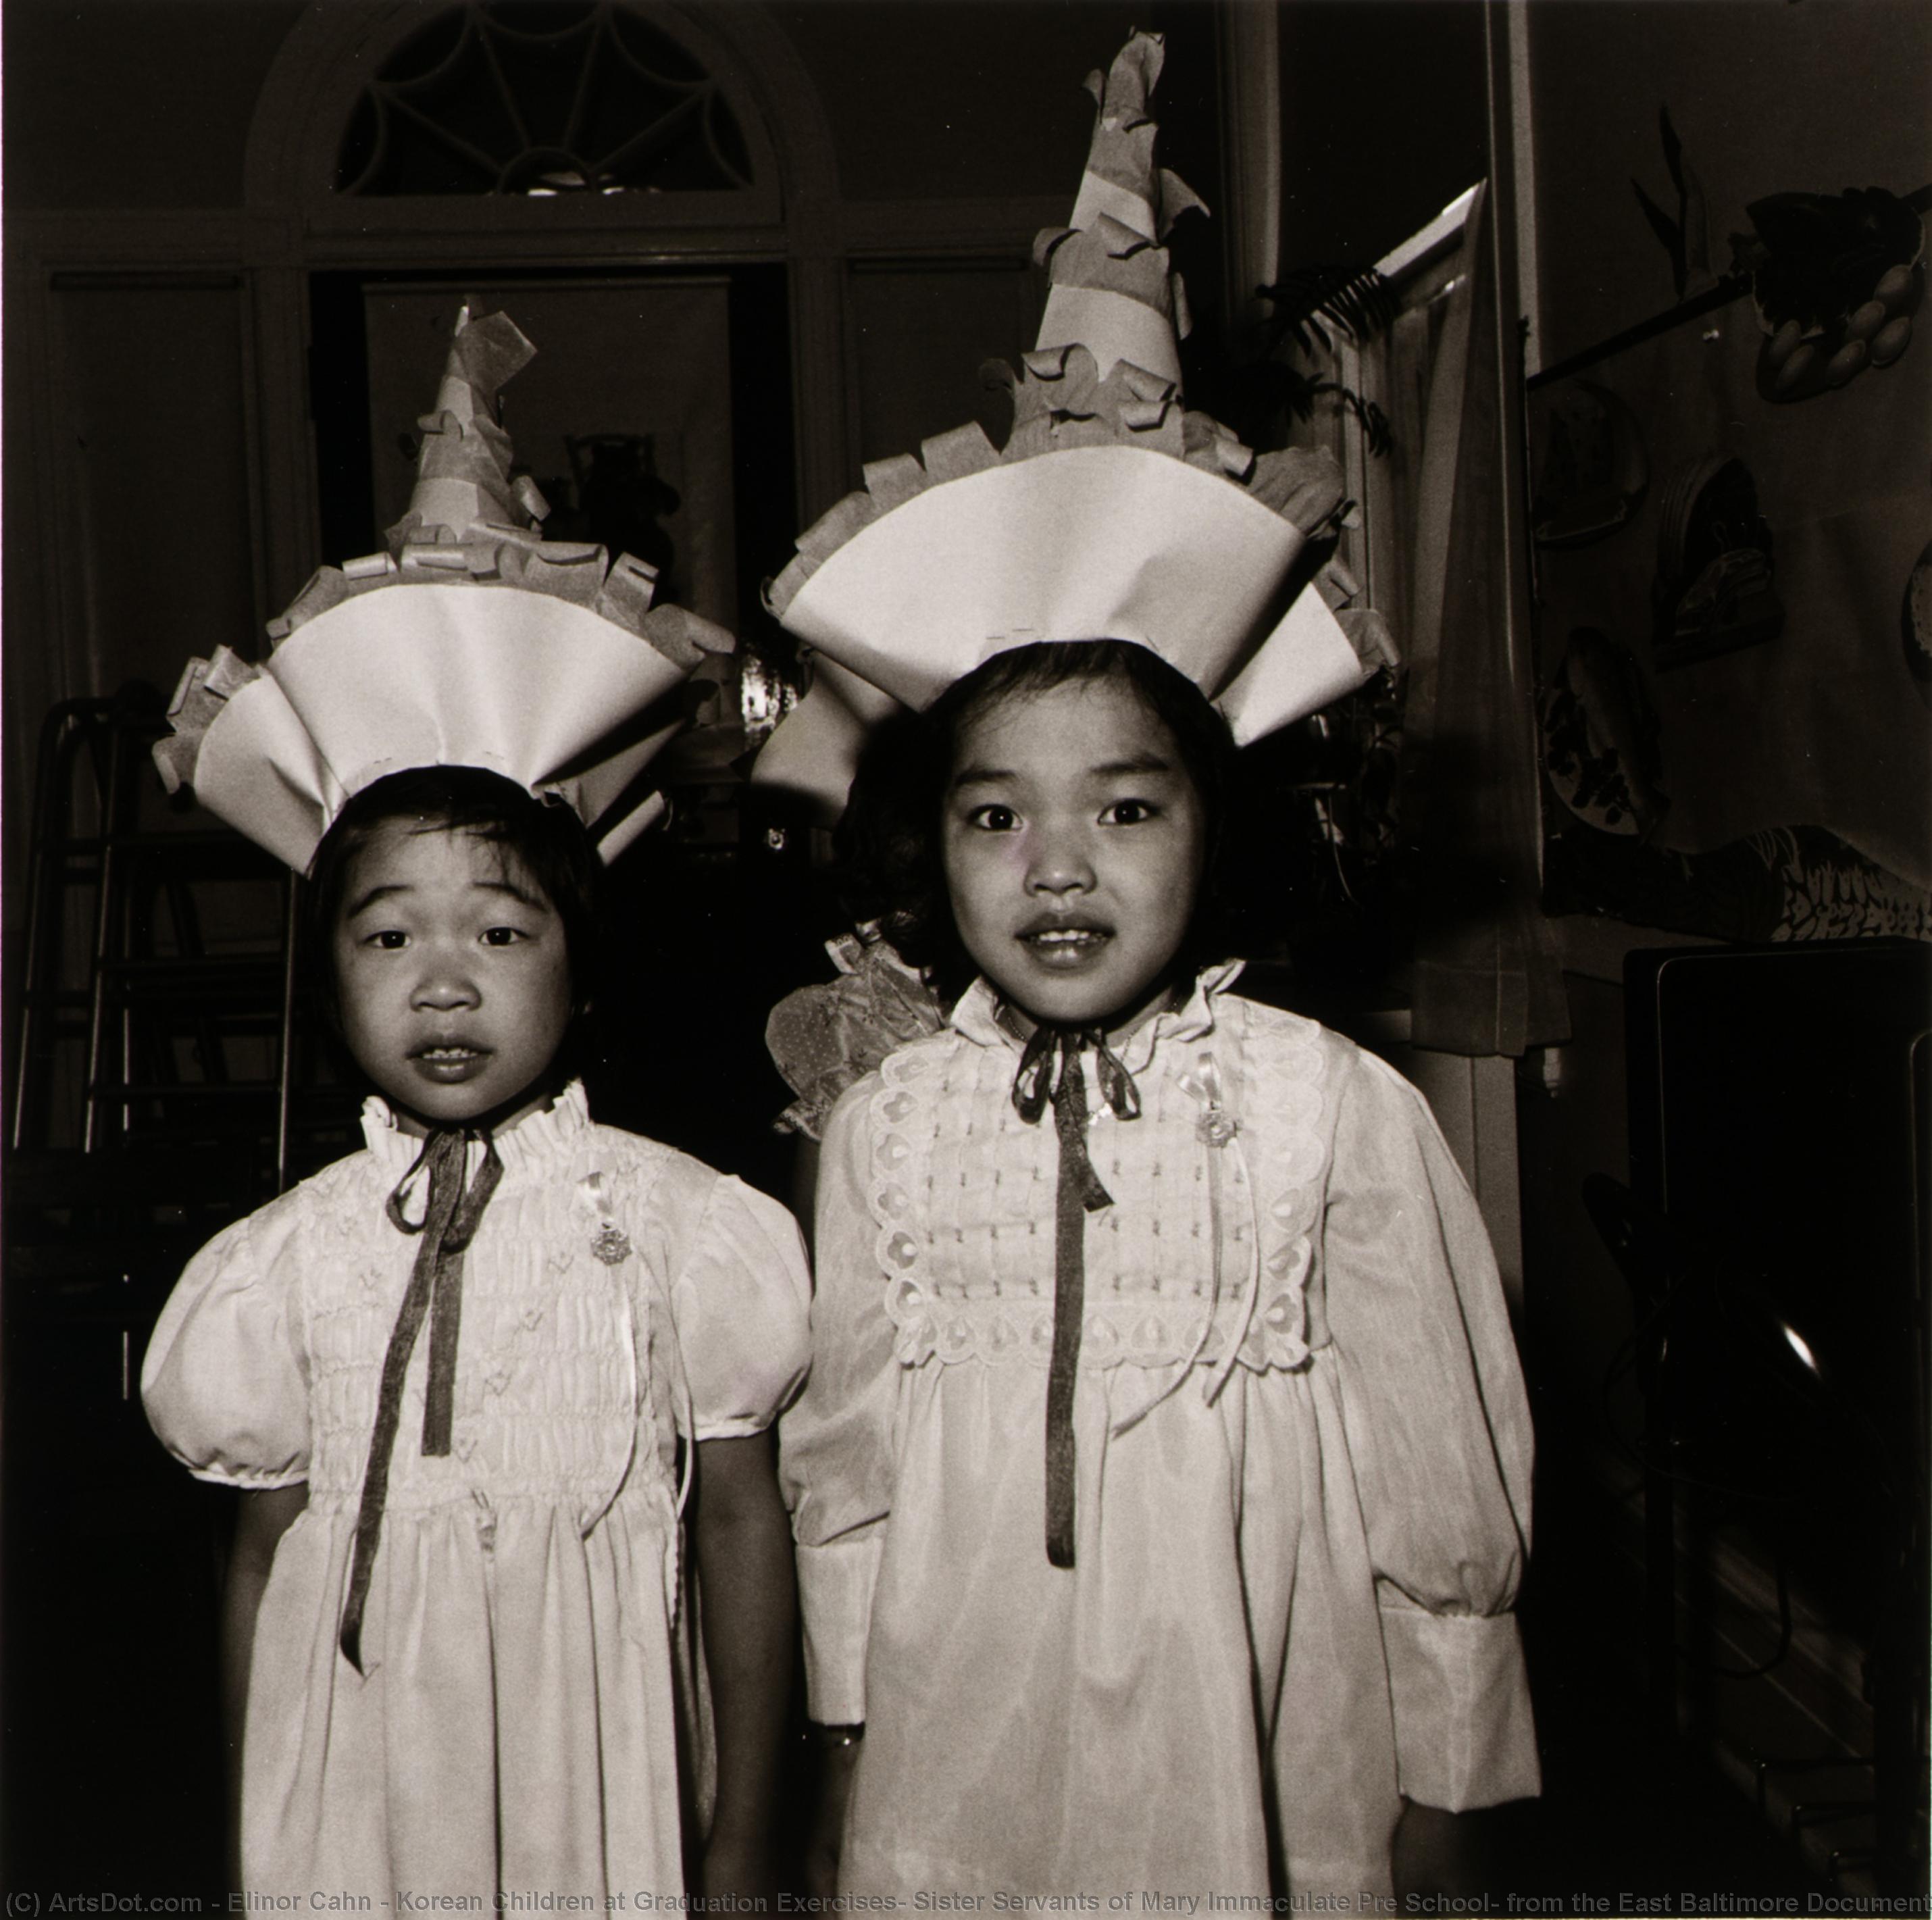 Korean Children at Graduation Exercises, Sister Servants of Mary Immaculate Pre School, from the East Baltimore Documentary Survey Project, 1979 by Elinor Cahn (1924-2020) Elinor Cahn | ArtsDot.com